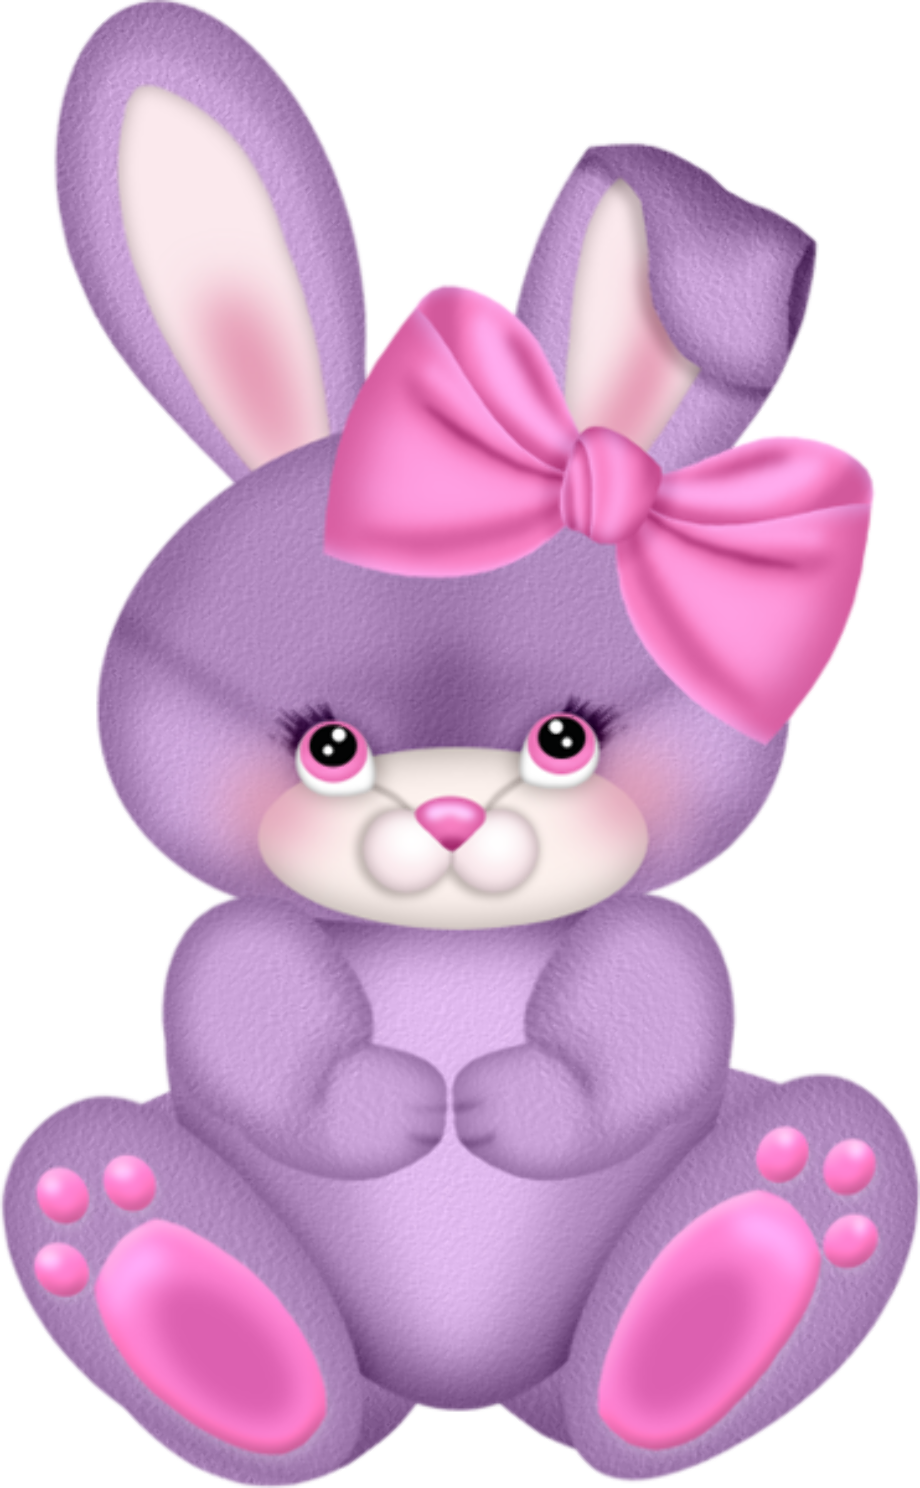 Download High Quality Easter Bunny Clipart Pink Transparent Png Images